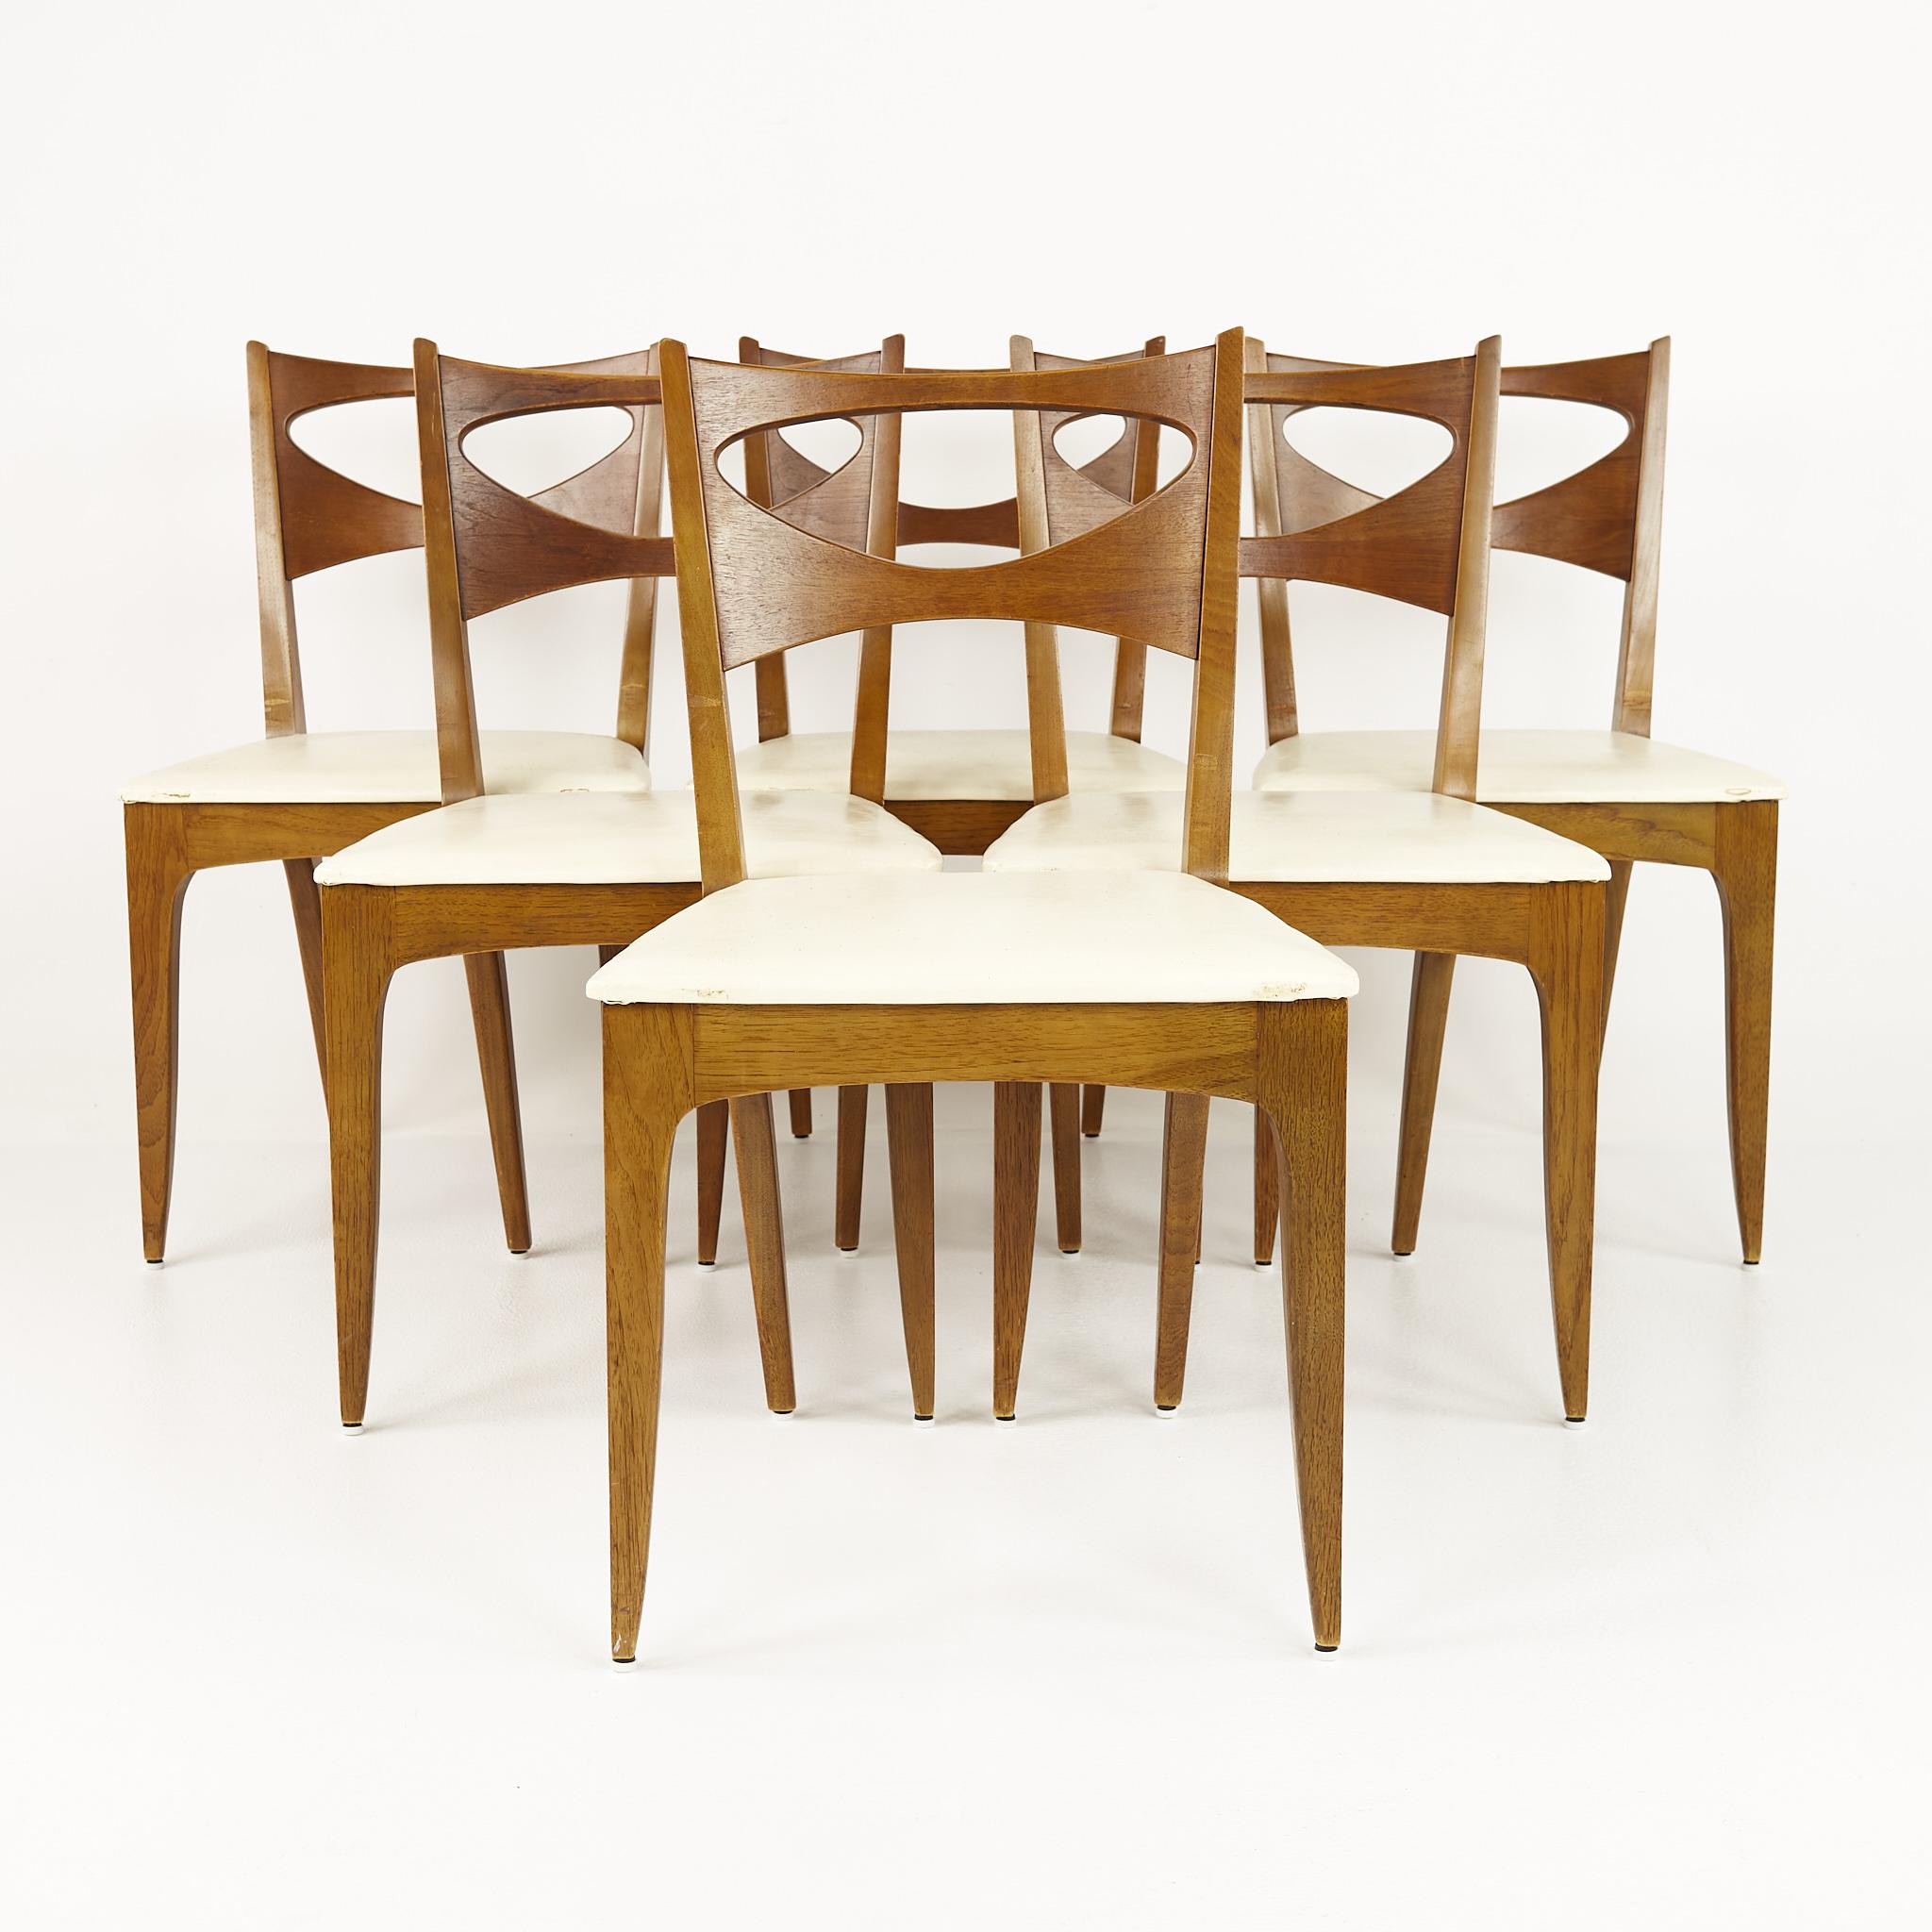 John Van Koert for Drexel mid century dining chairs - Set of 6

Each chair measures: 19 wide x 20.5 deep x 34 high, with a seat height of 18 inches

All pieces of furniture can be had in what we call restored vintage condition. That means the